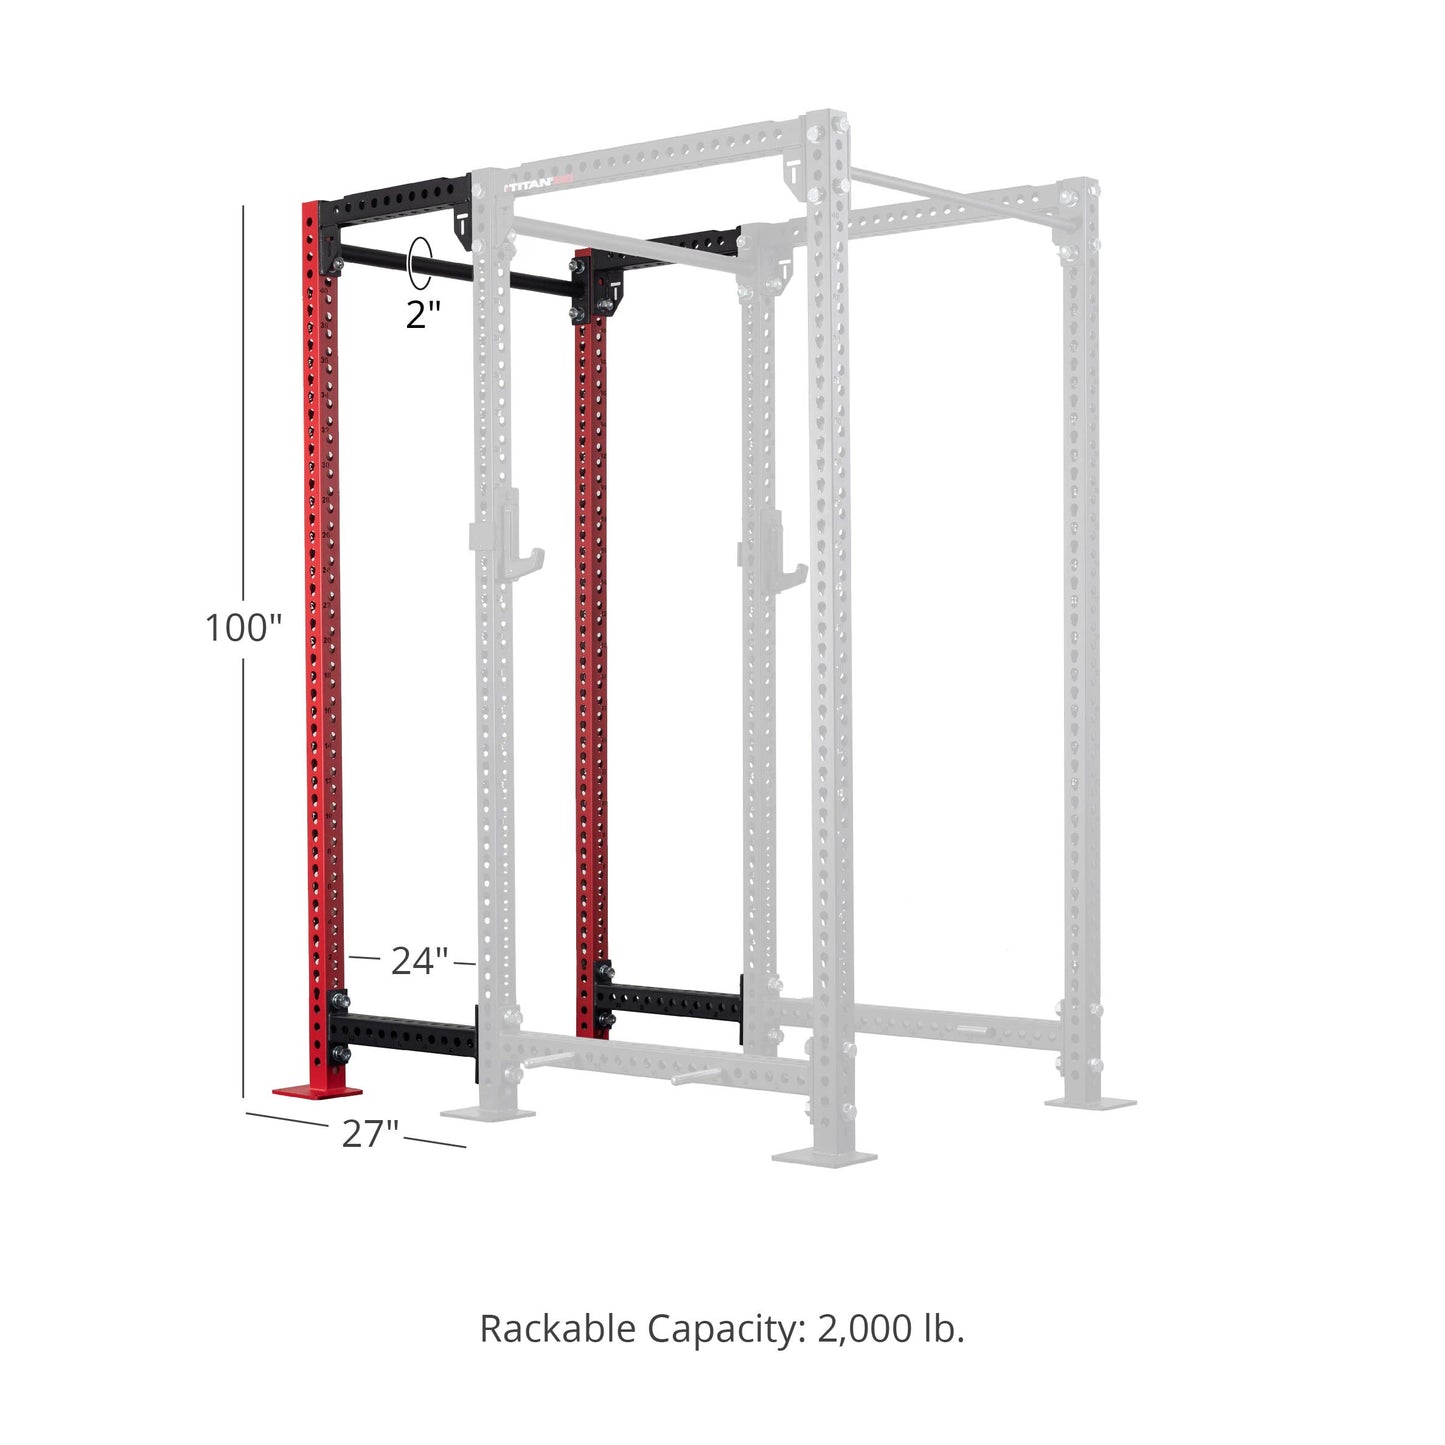 TITAN Series 24" Extension Kit - Extension Color: Red - Extension Height: 100" - Crossmember: 2" Fat Pull-Up Bar | Red / 100" / 2" Fat Pull-Up Bar - view 154